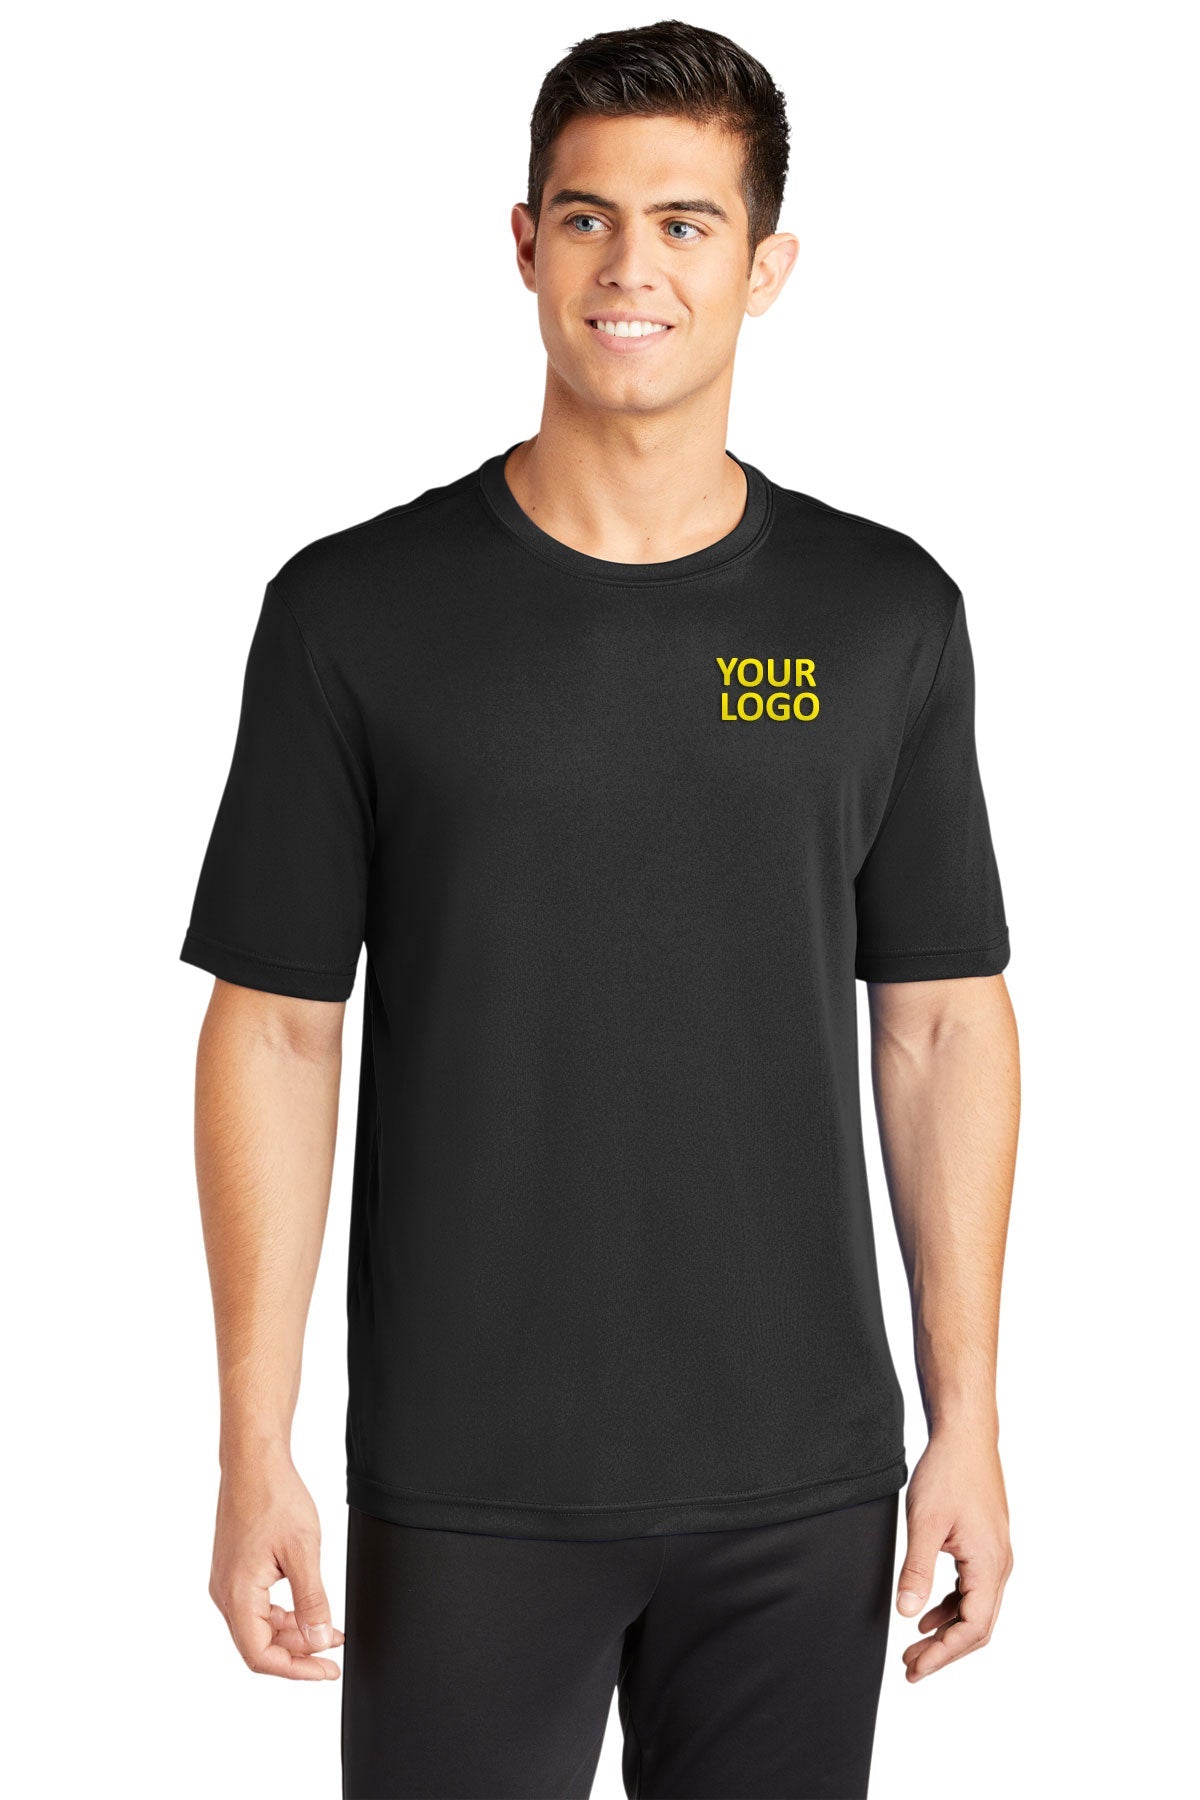 Sport-Tek Tall PosiCharge Competitor Tee